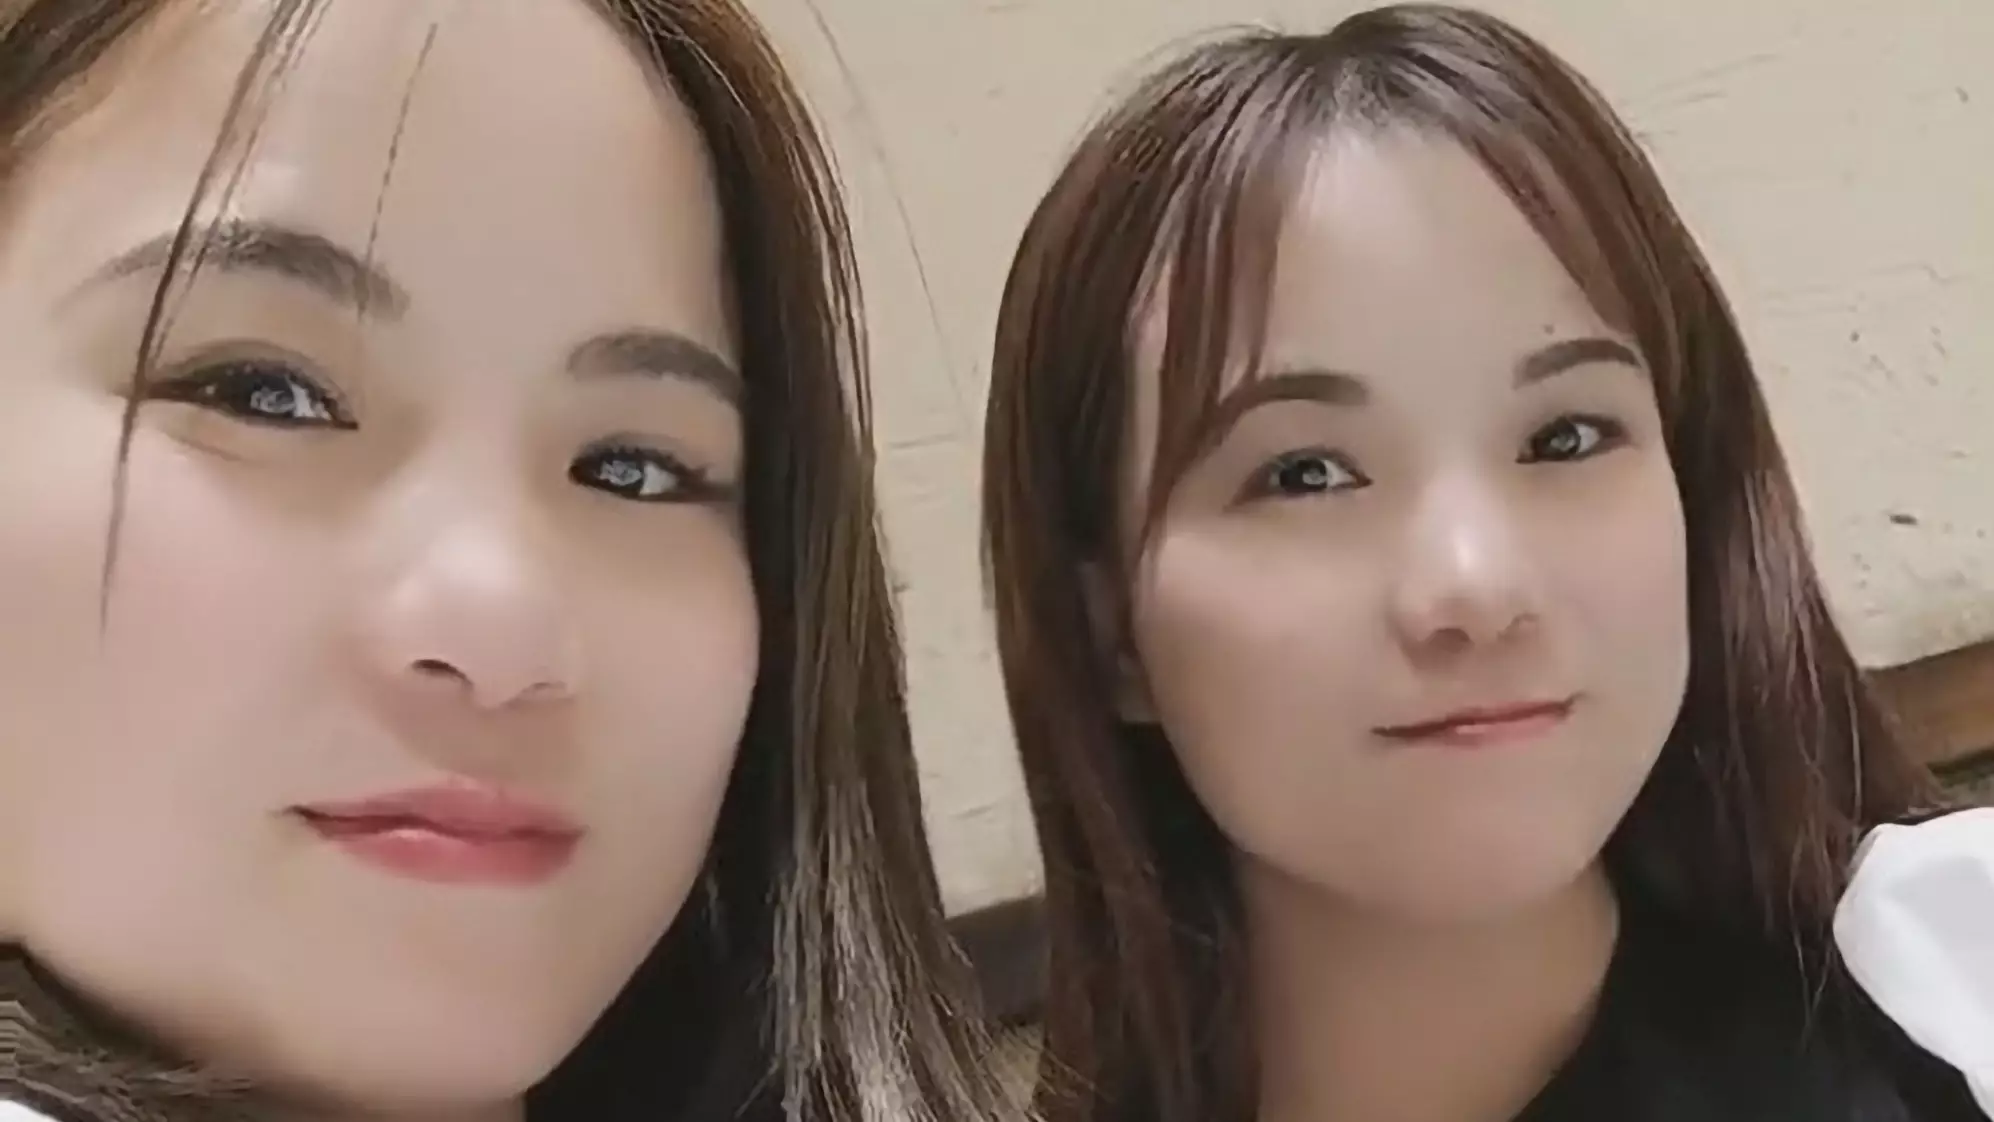 Women Spot They Look Alike On Social Media And Turn Out To Be Twins